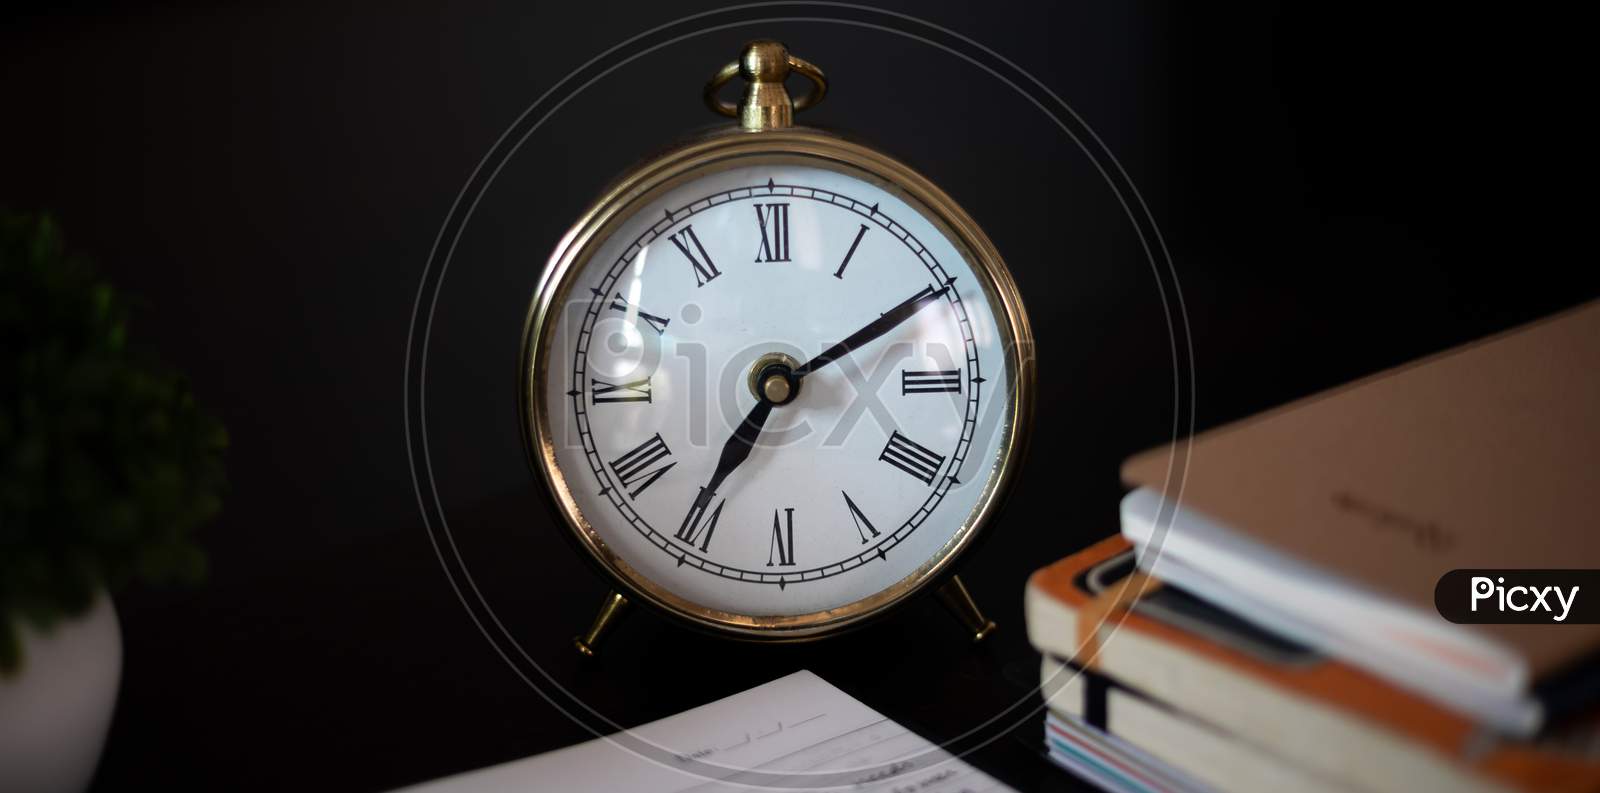 Aesthetic Antique clock showing 7'o clock. Work from home WFH. Workspace with books and indoor plant on dark black office table desk. Closeup, profile shot.